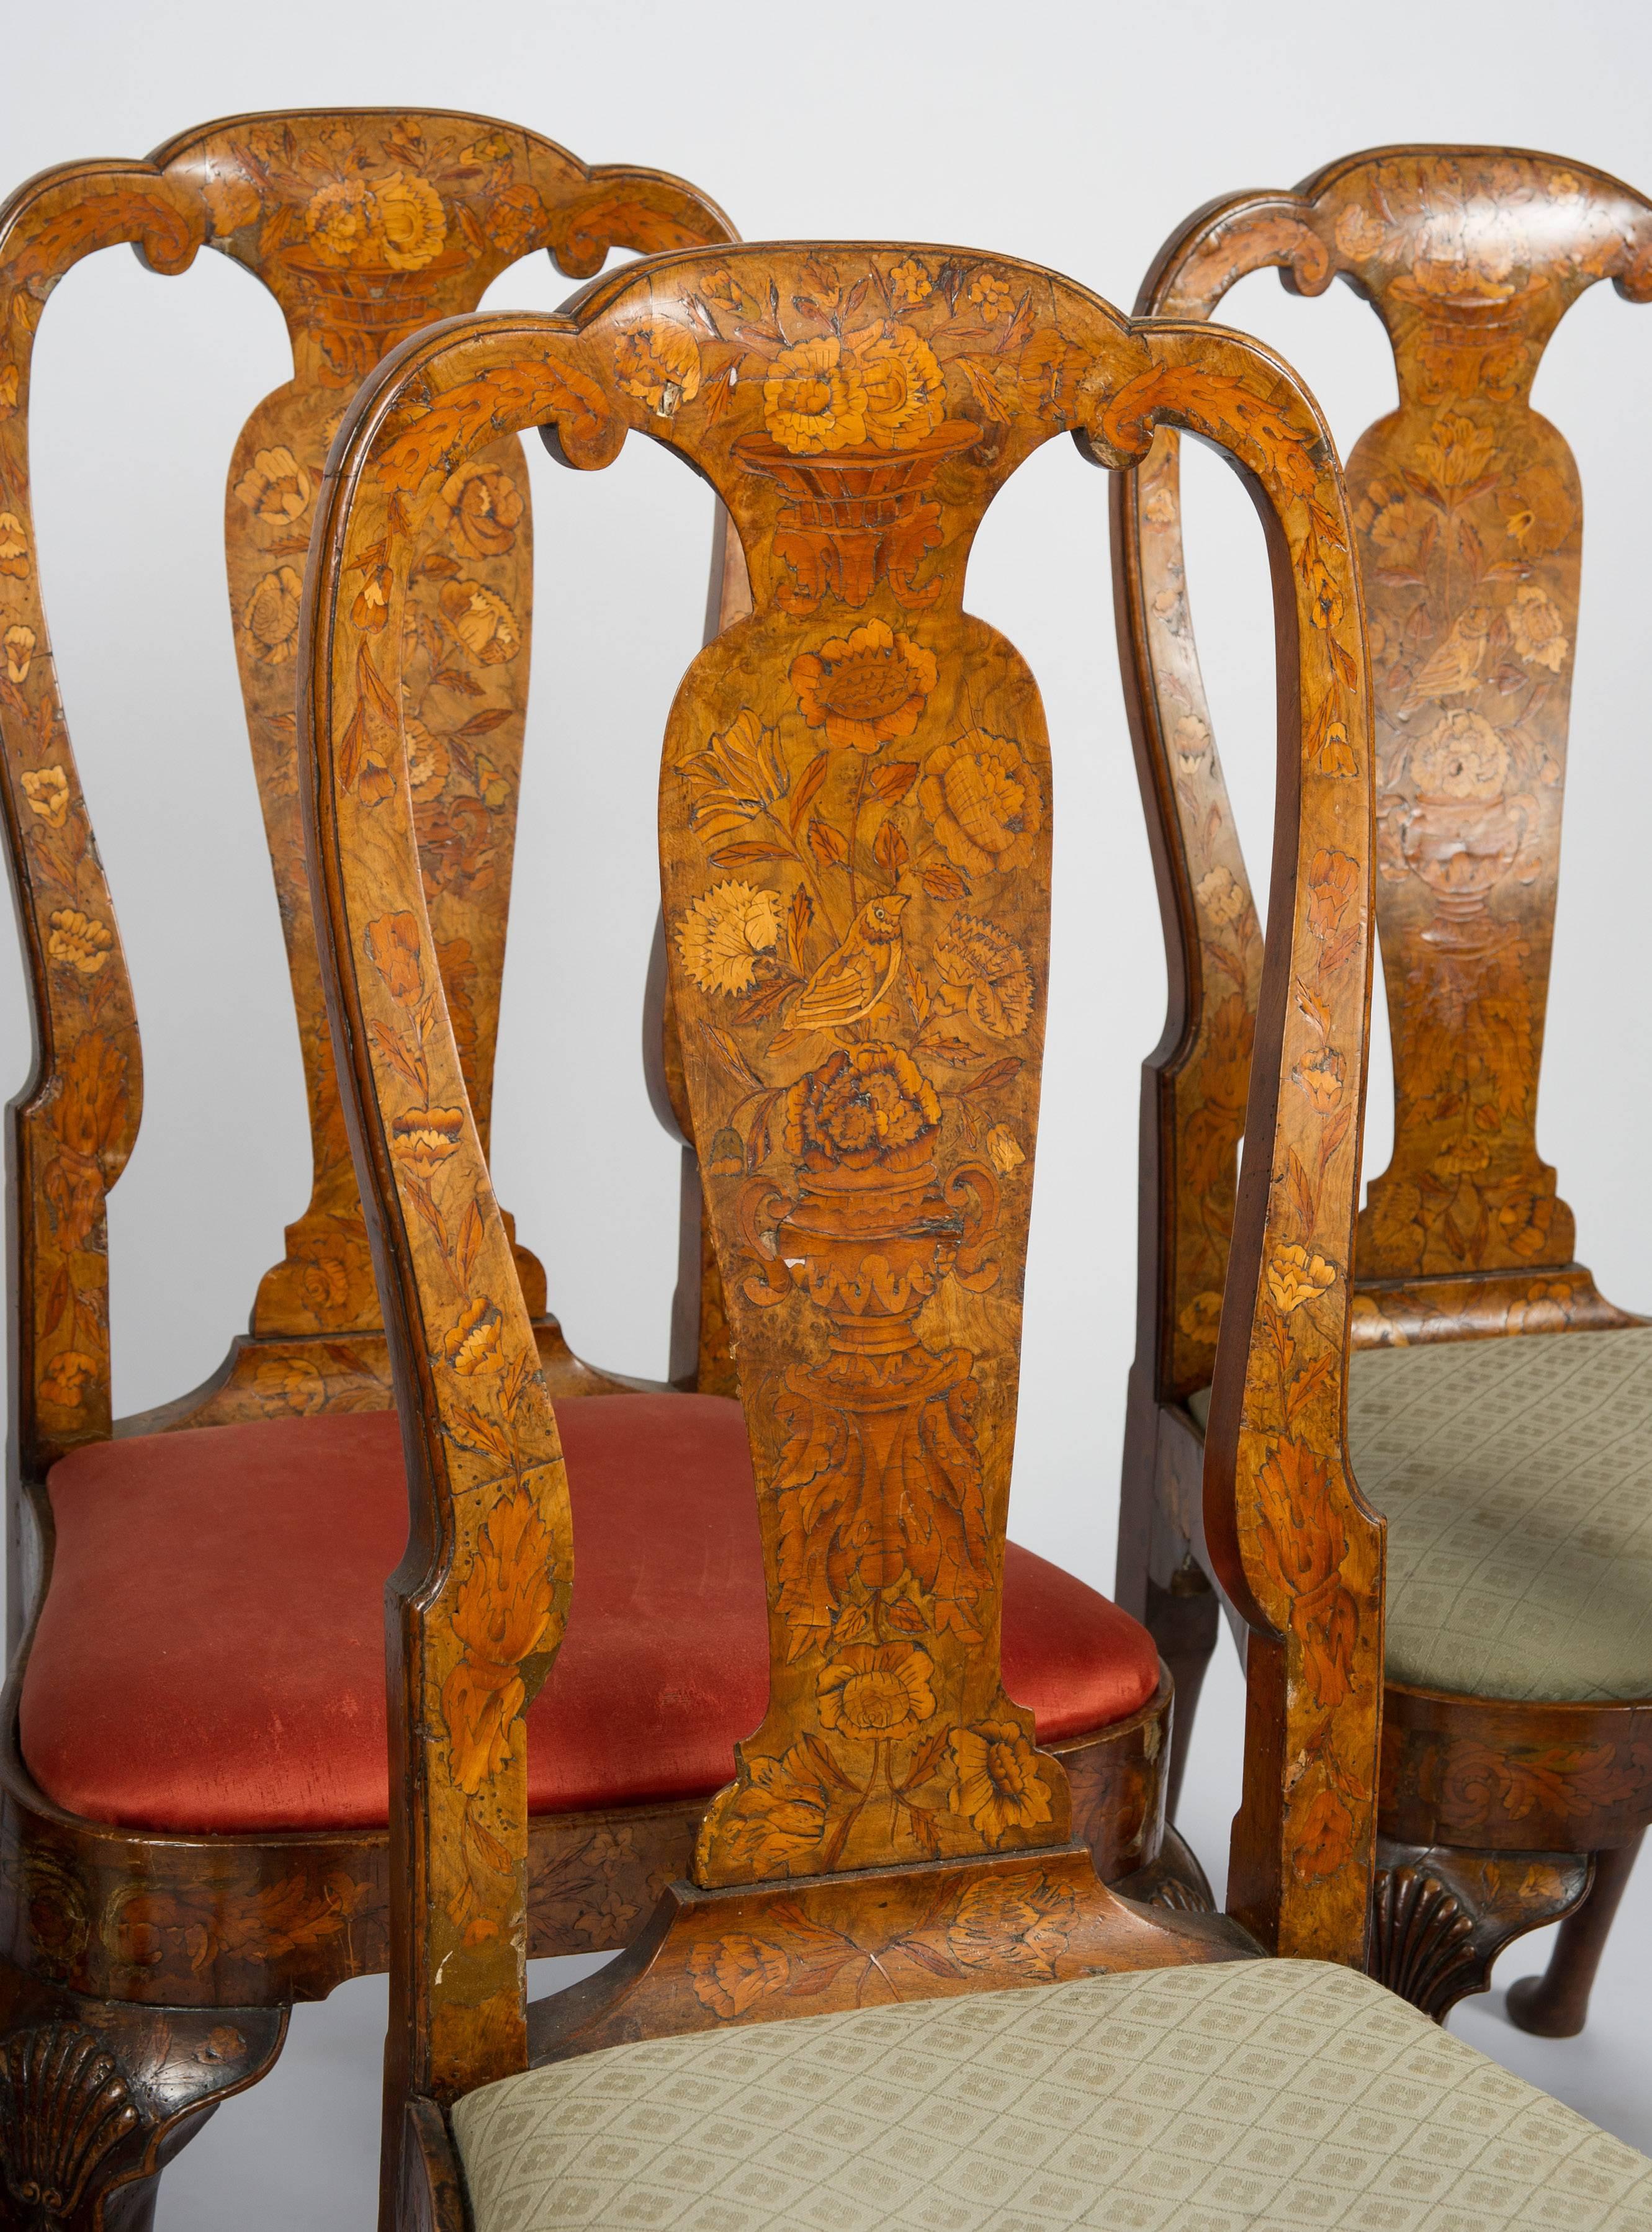 A good quality set of six 18th century Dutch marquetry chairs, each having flowers, leaves, birds and urns inlaid to the backs and apron. Drop in seats and raised on carved cabriole legs terminating in pad feet.